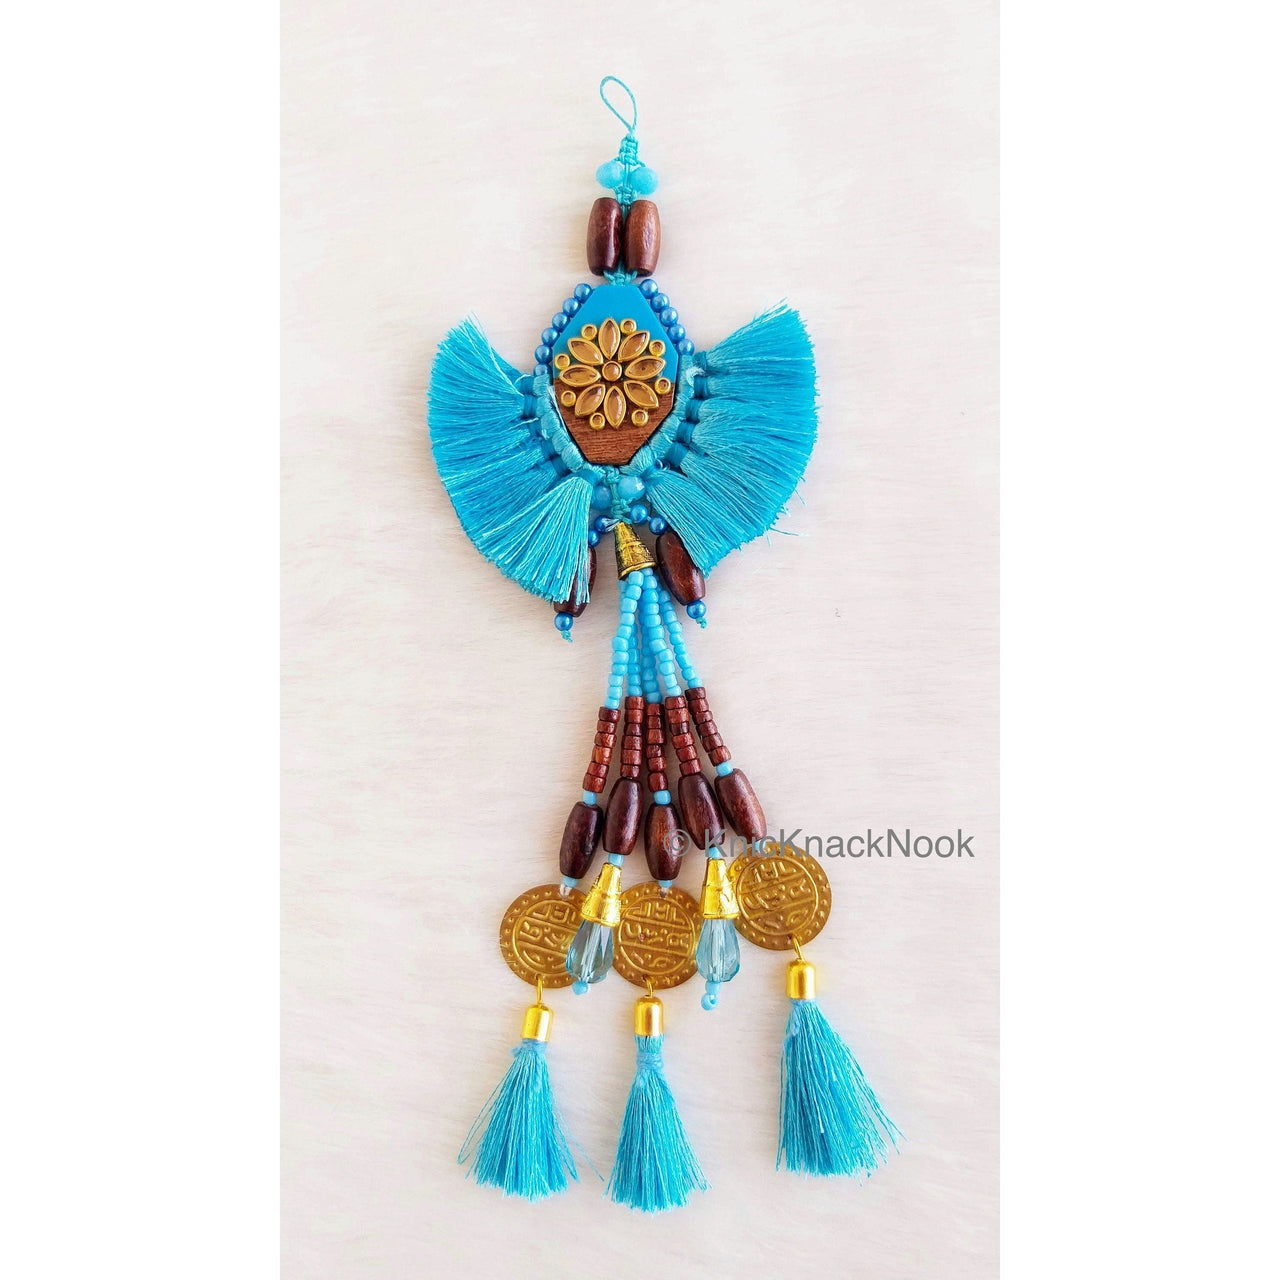 Cyan Blue Tassels With Blue Acrylic And Brown Wood Button In Kundan Stones, Wood Beads, Pearls